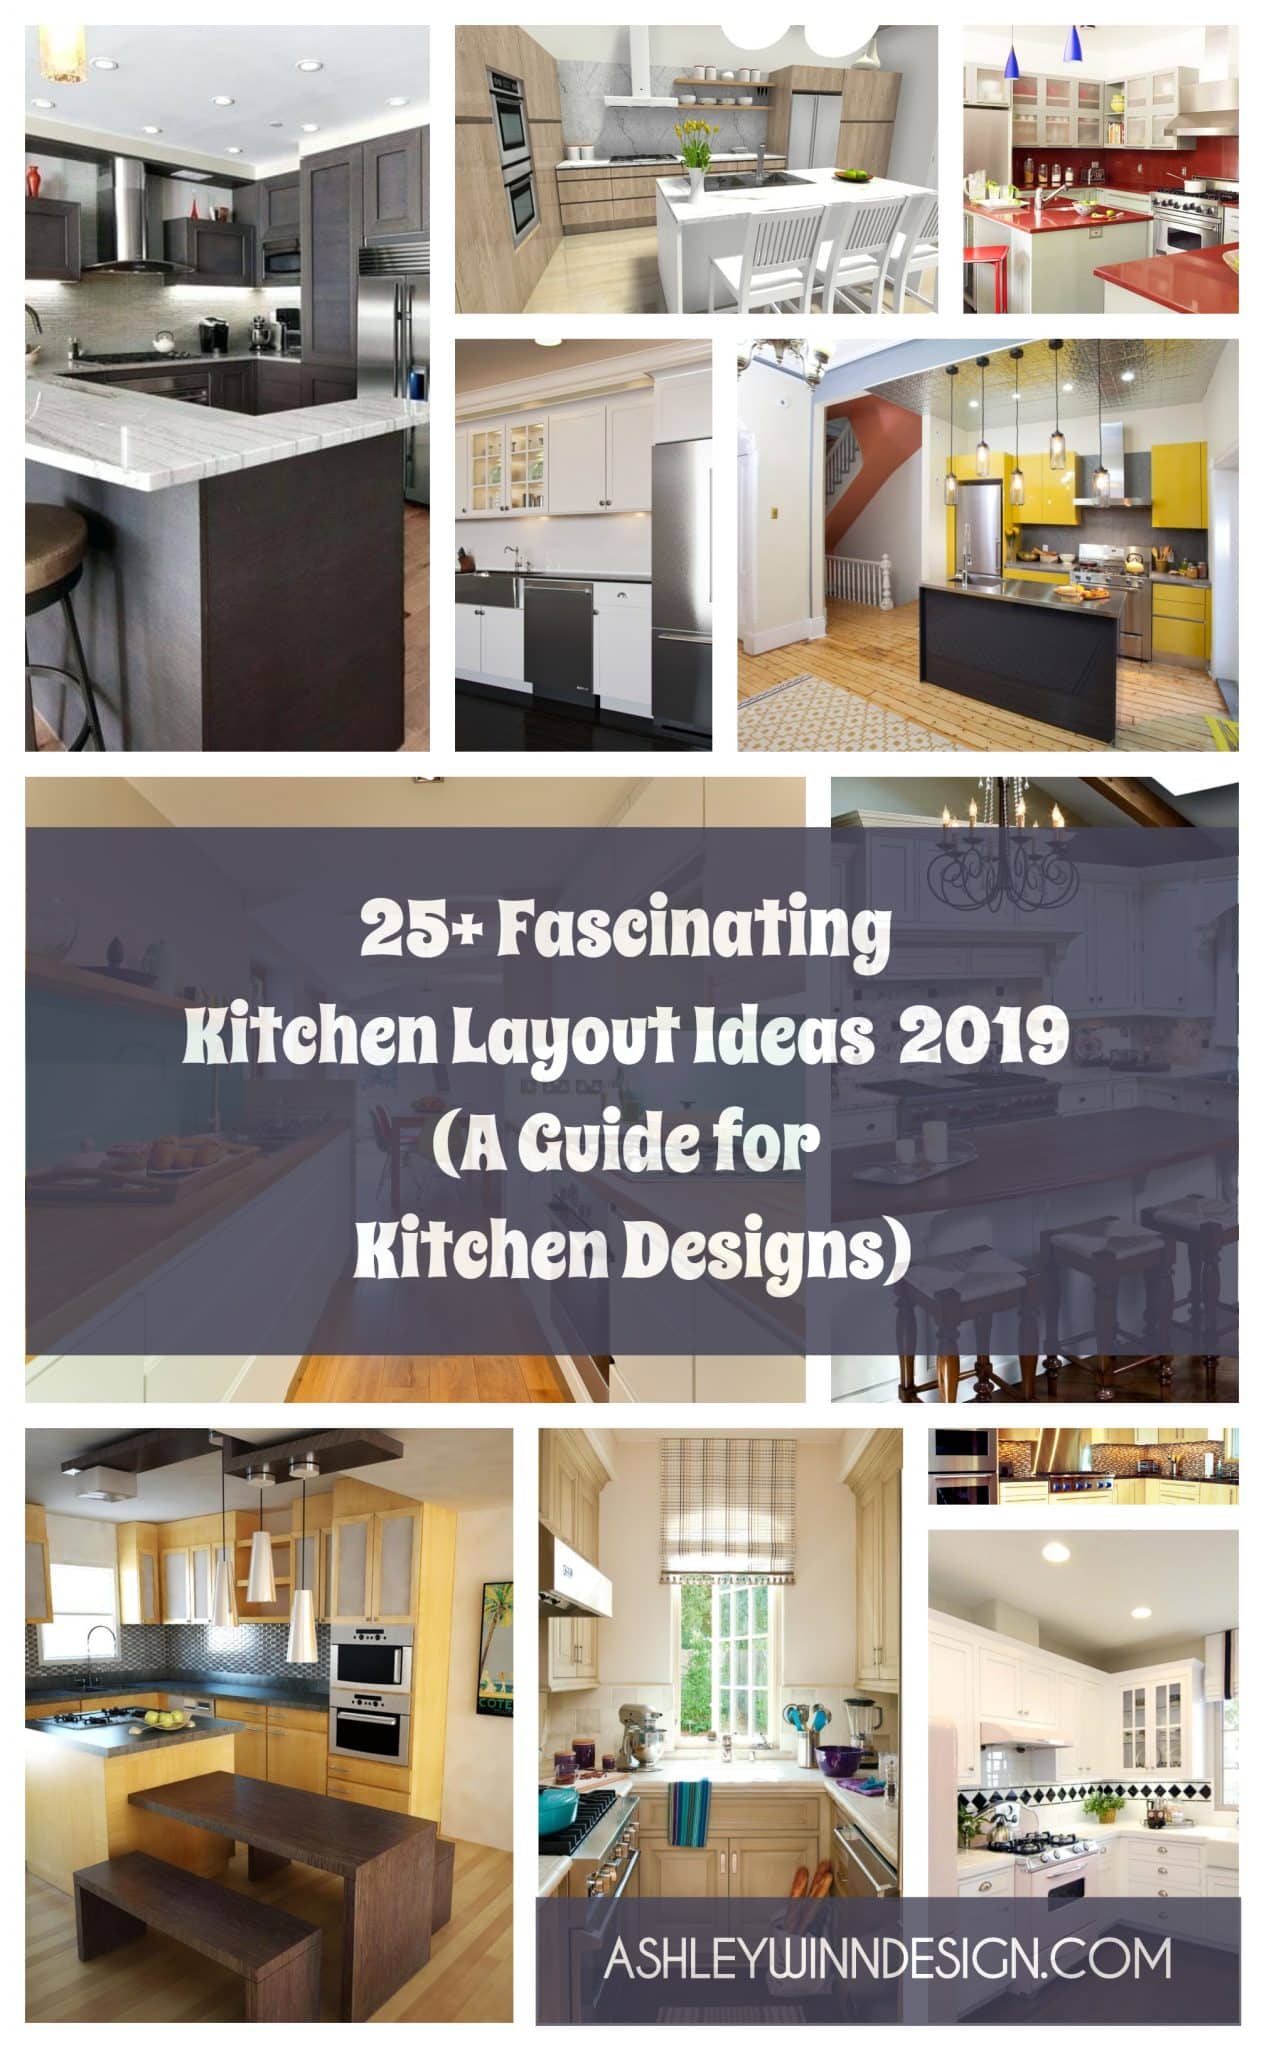 25+ Fascinating Kitchen Layout Ideas 2021 [A Guide for Kitchen Designs]